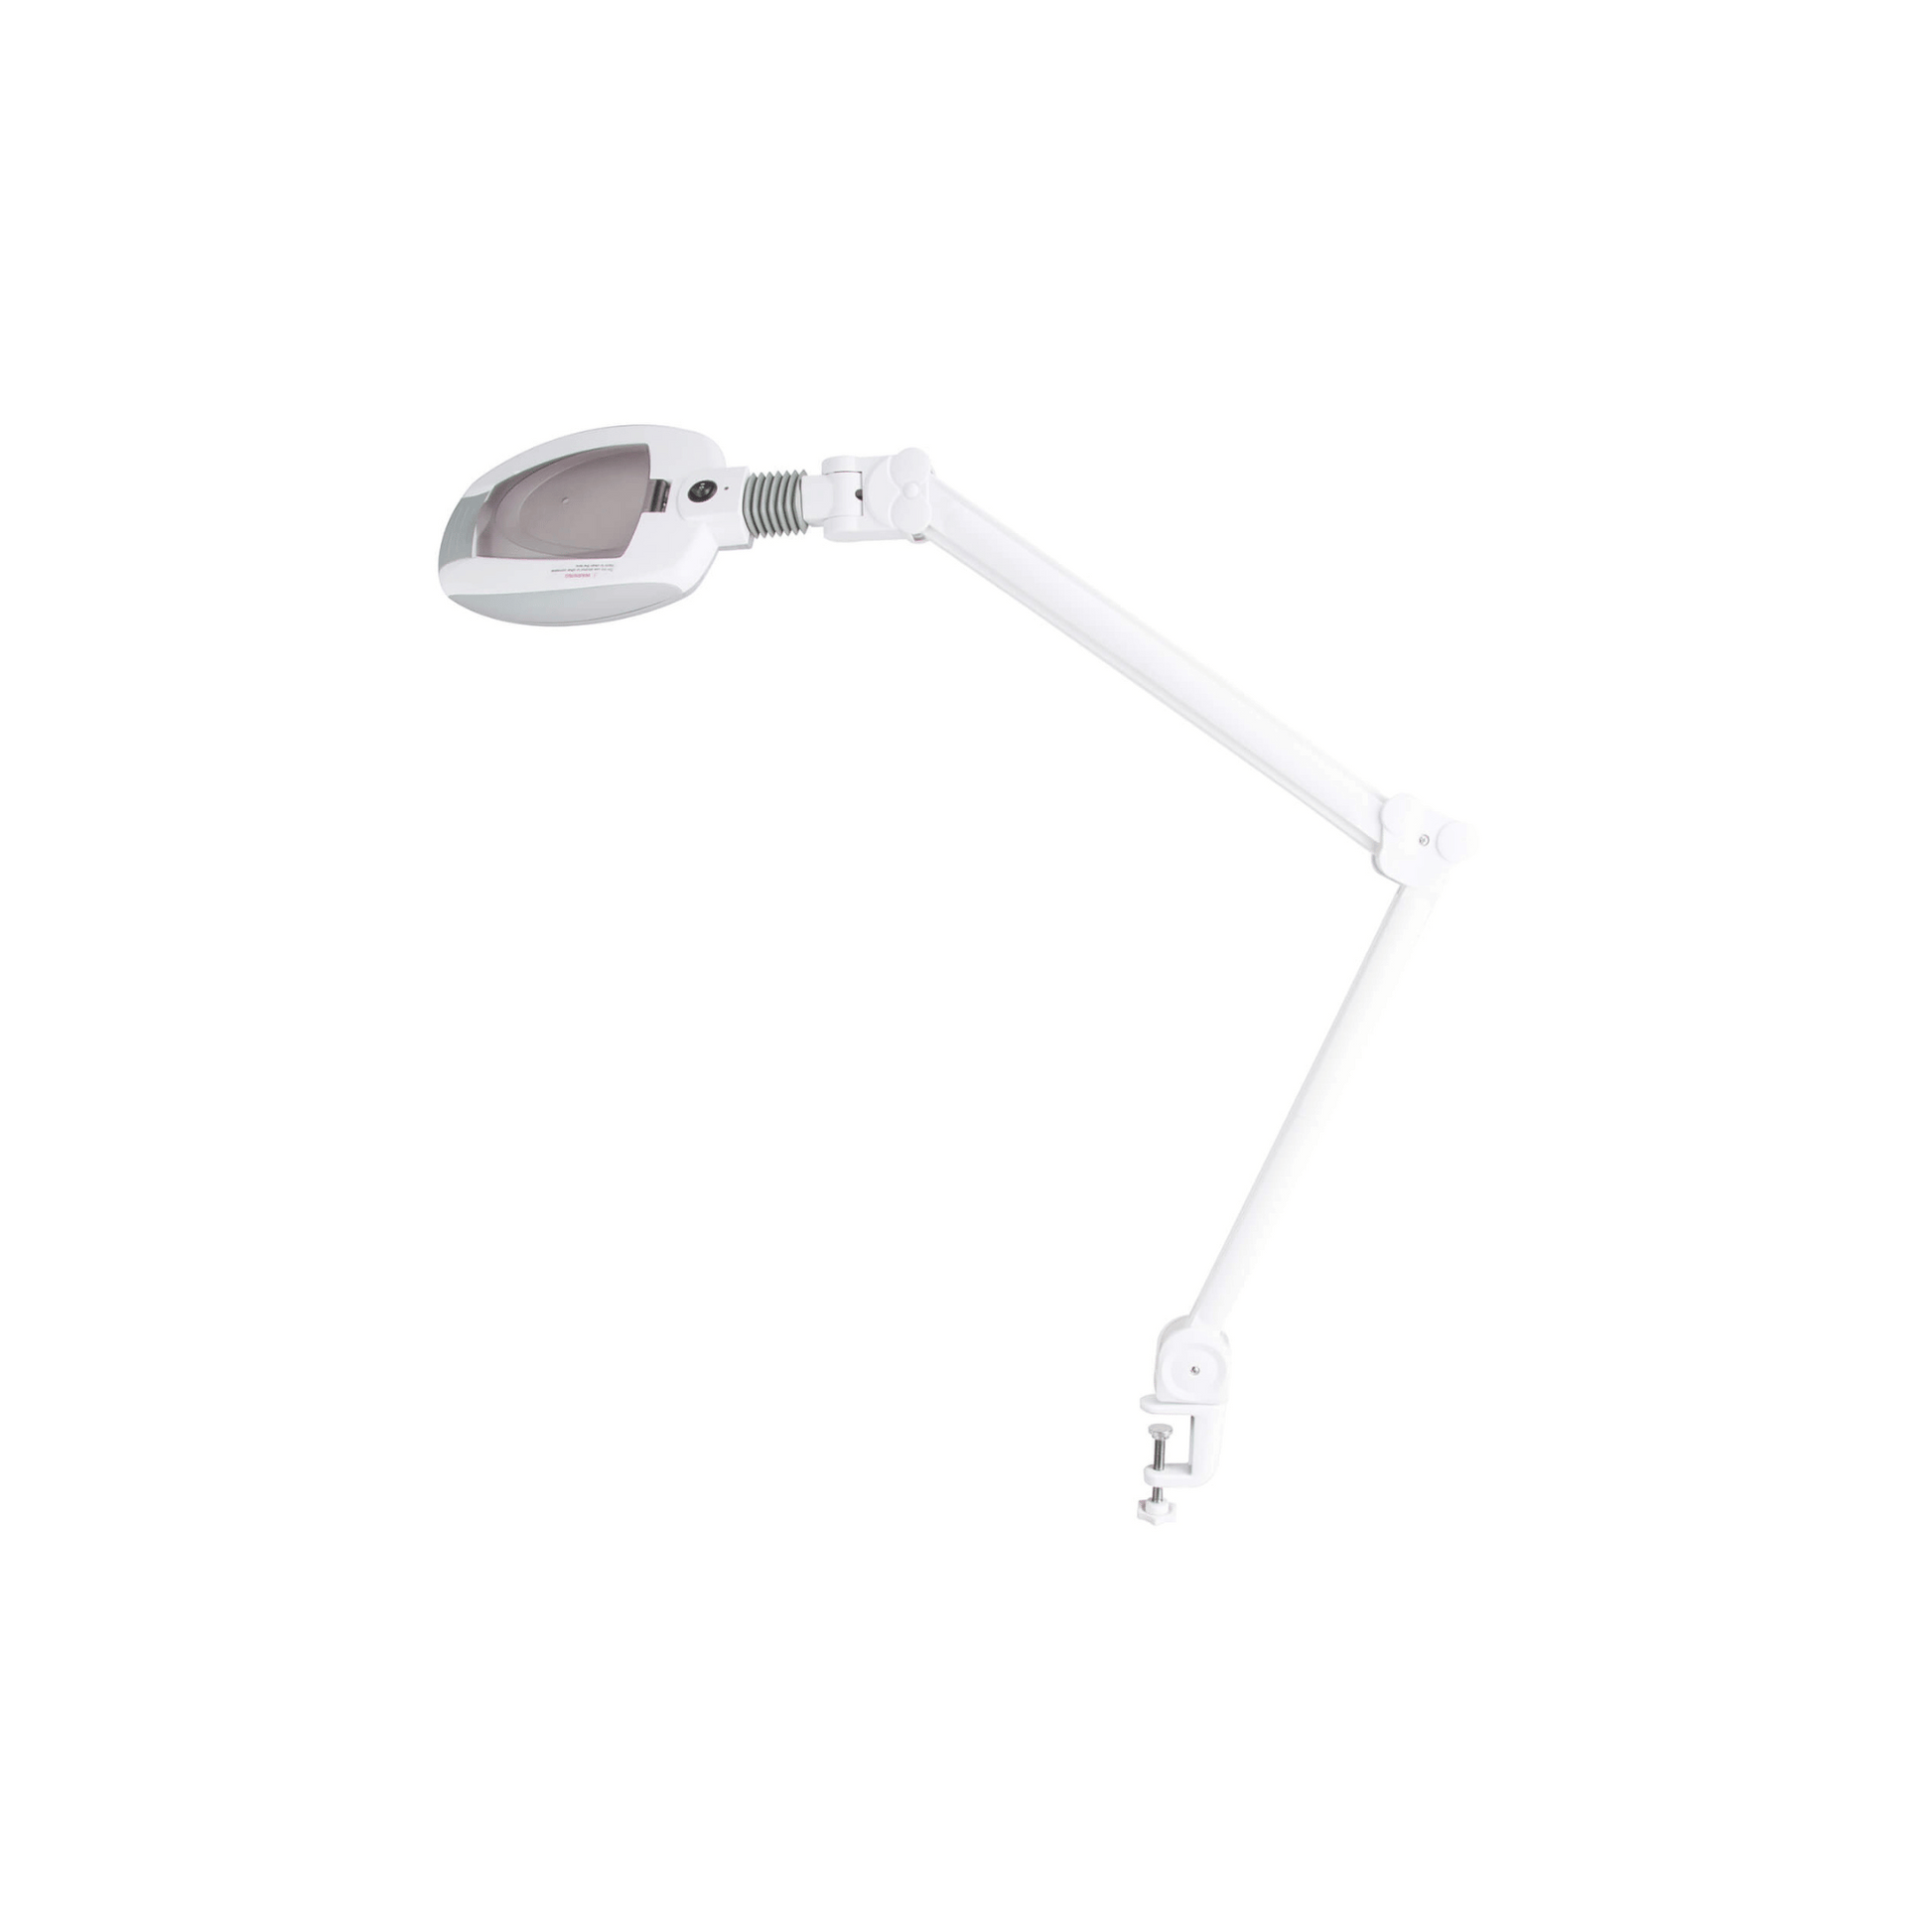 ViewMax - 1005 Magnifying Lamp With Focal Support Image 1